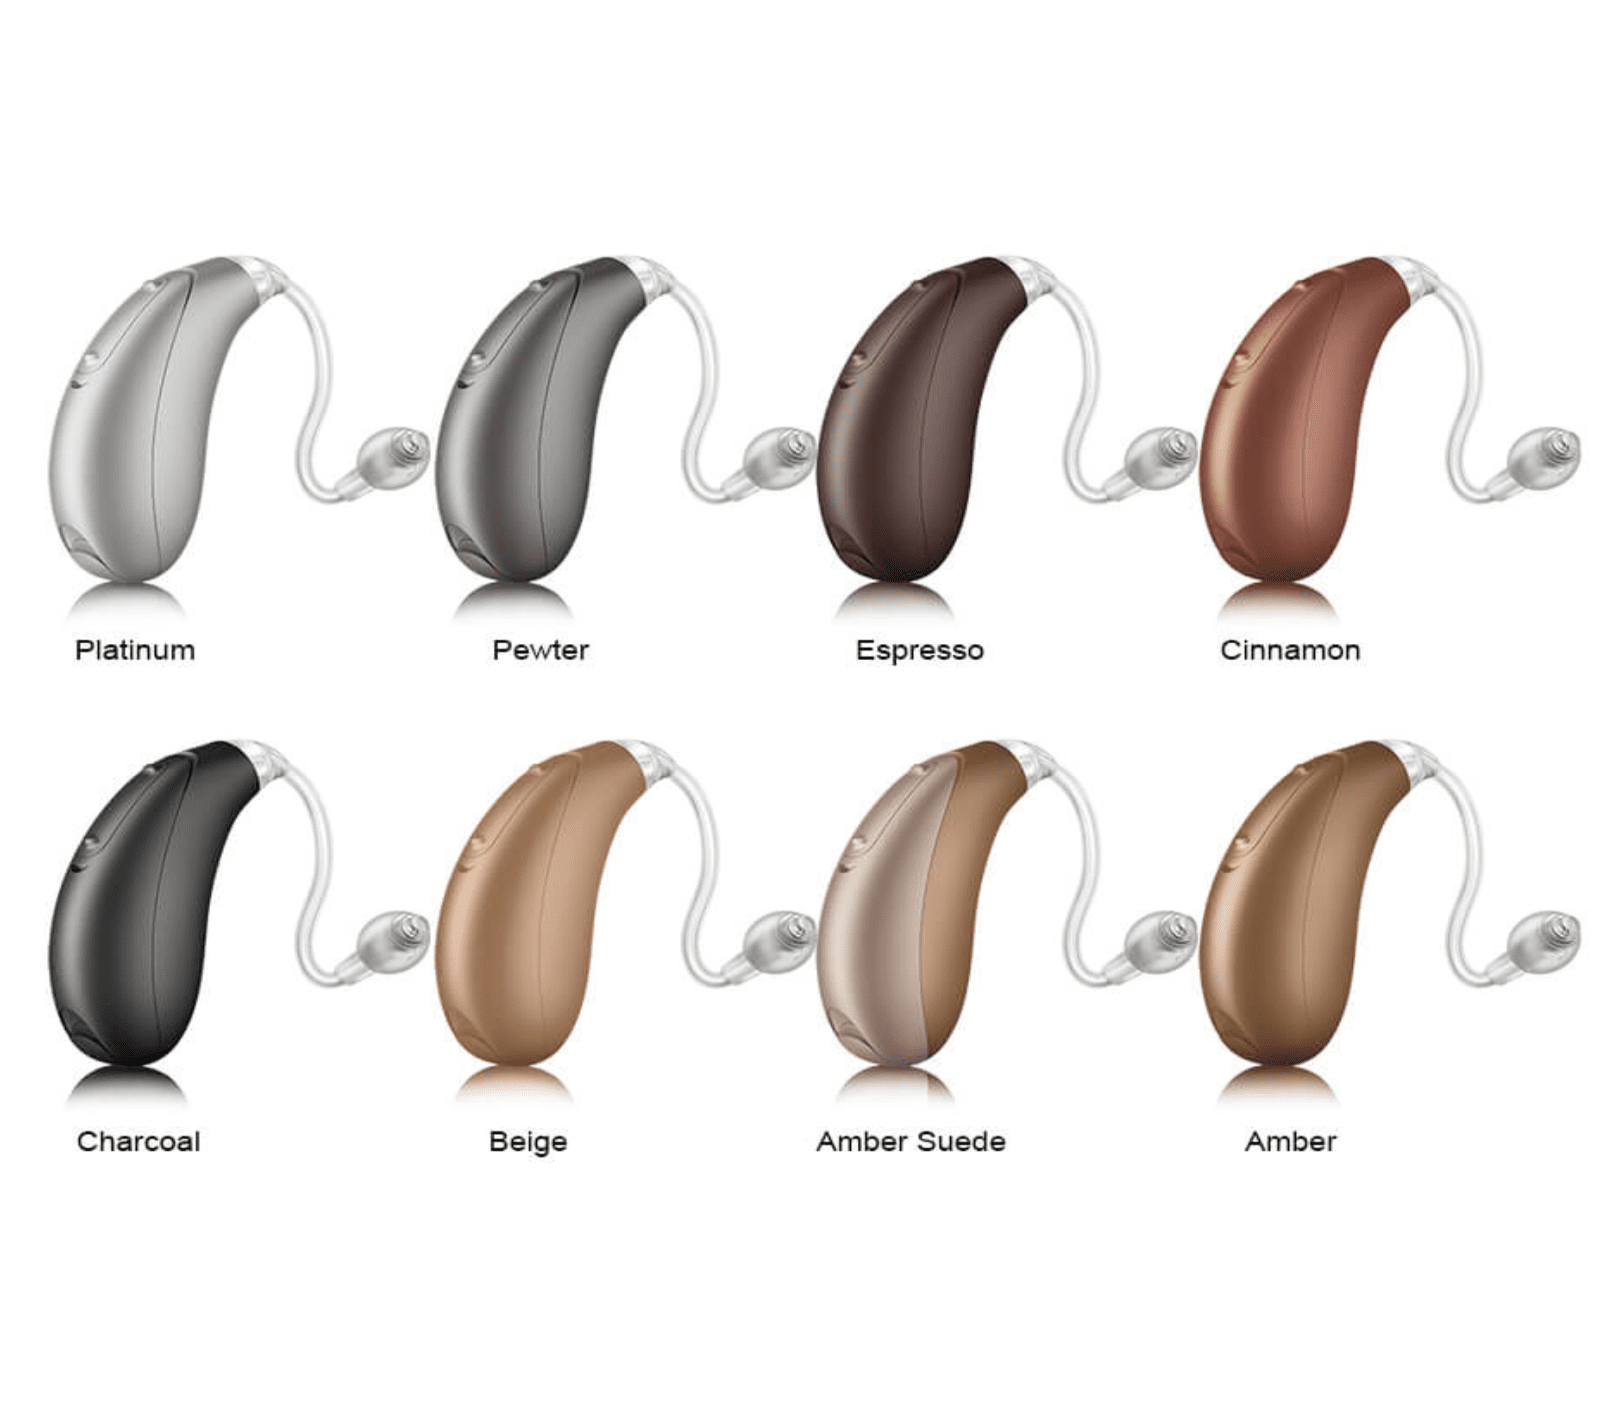 A set of Multifunctional QuickFit MF Pro-Hearing Aid and Earplug Combo in different colors.